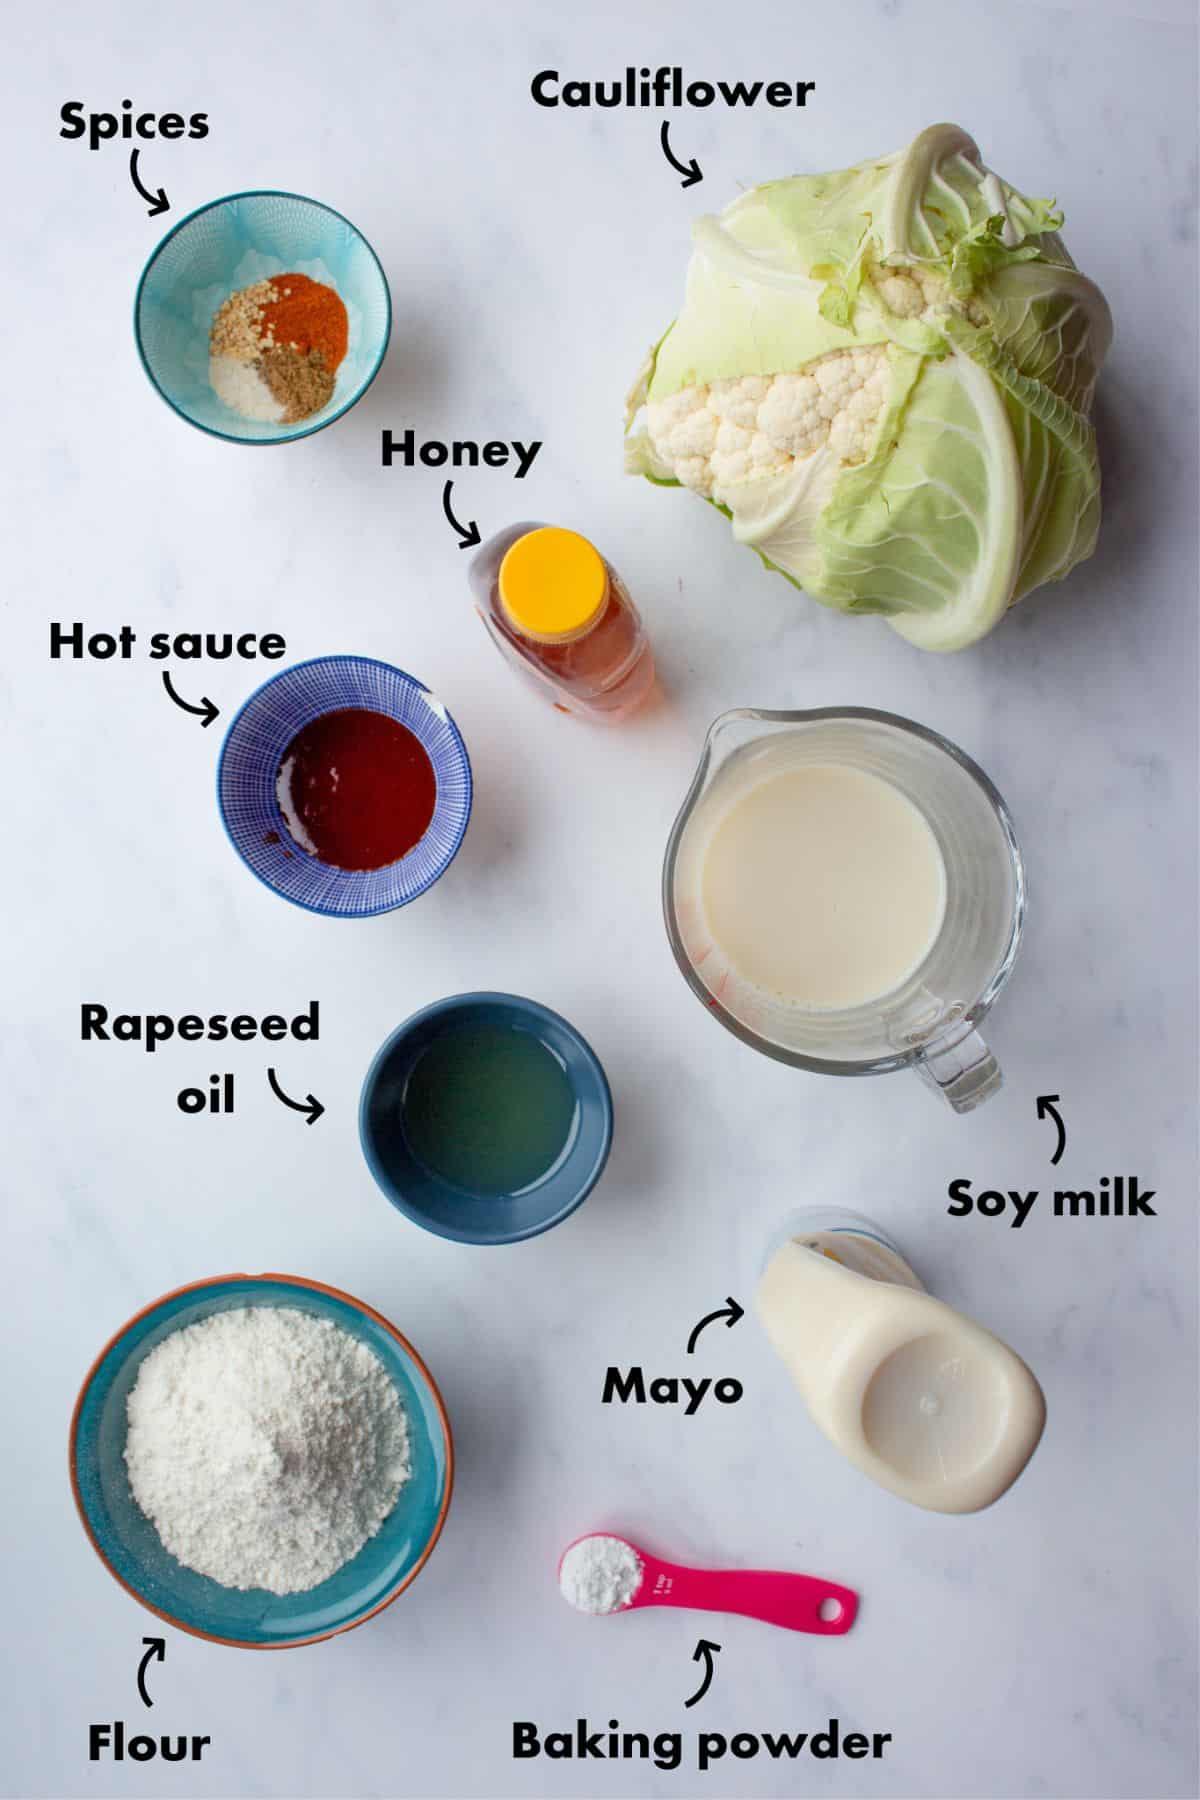 Ingredients to make Cauliflower bites laid out on a pale grey background and labelled.